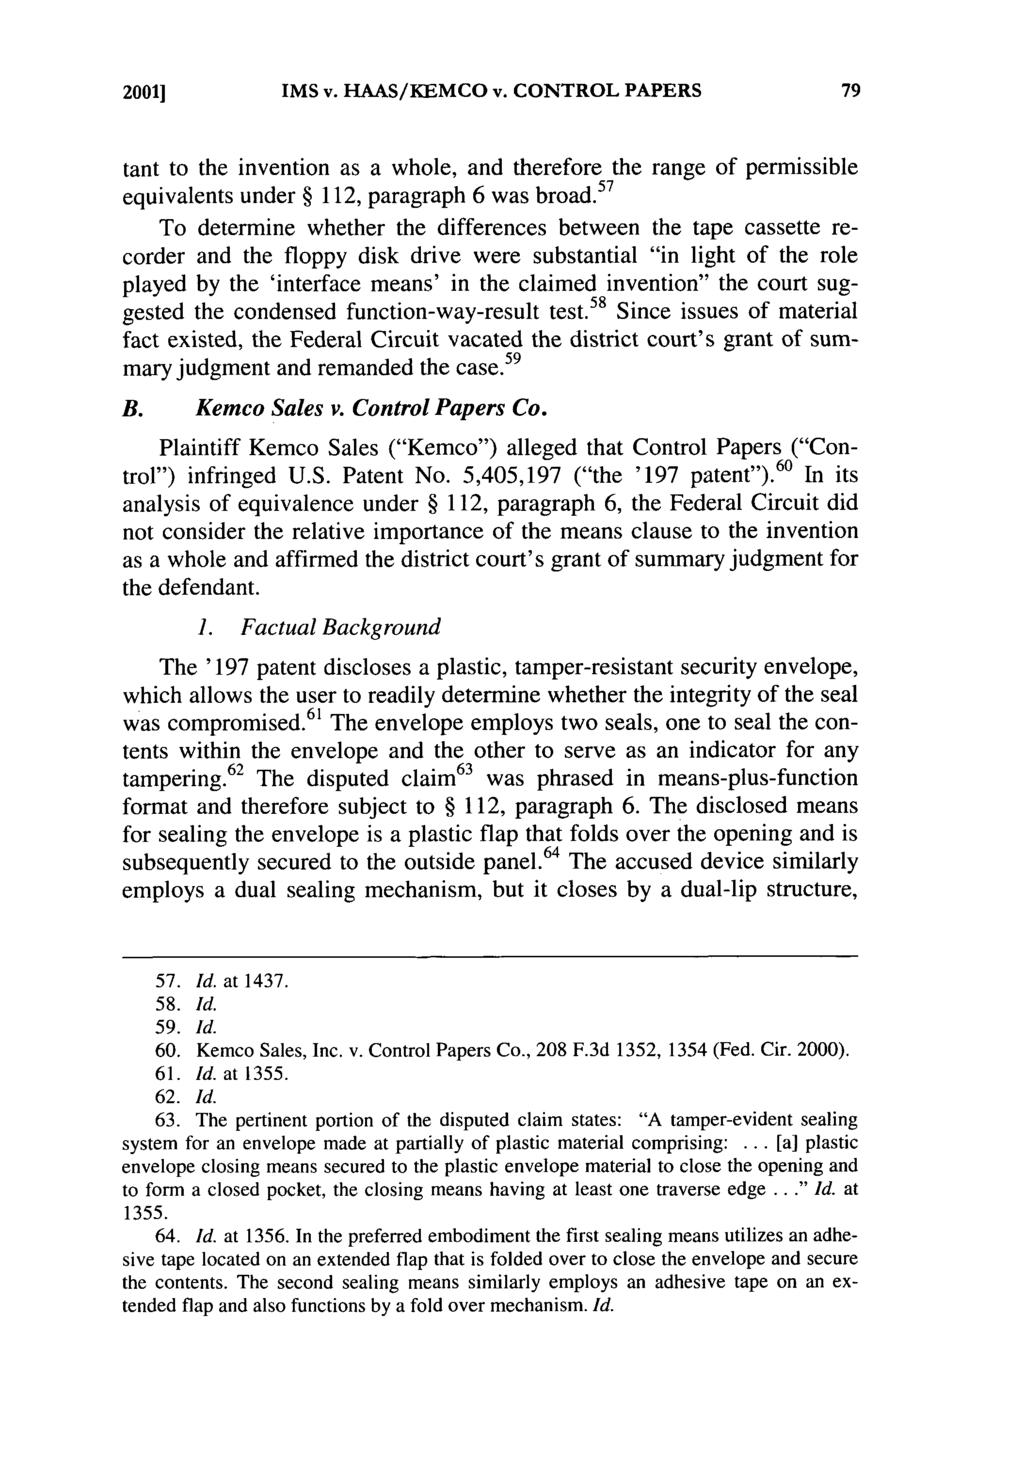 20011 IMS v. HAAS/KEMCO v. CONTROL PAPERS tant to the invention as a whole, and therefore the range of permissible equivalents under 112, paragraph 6 was broad.